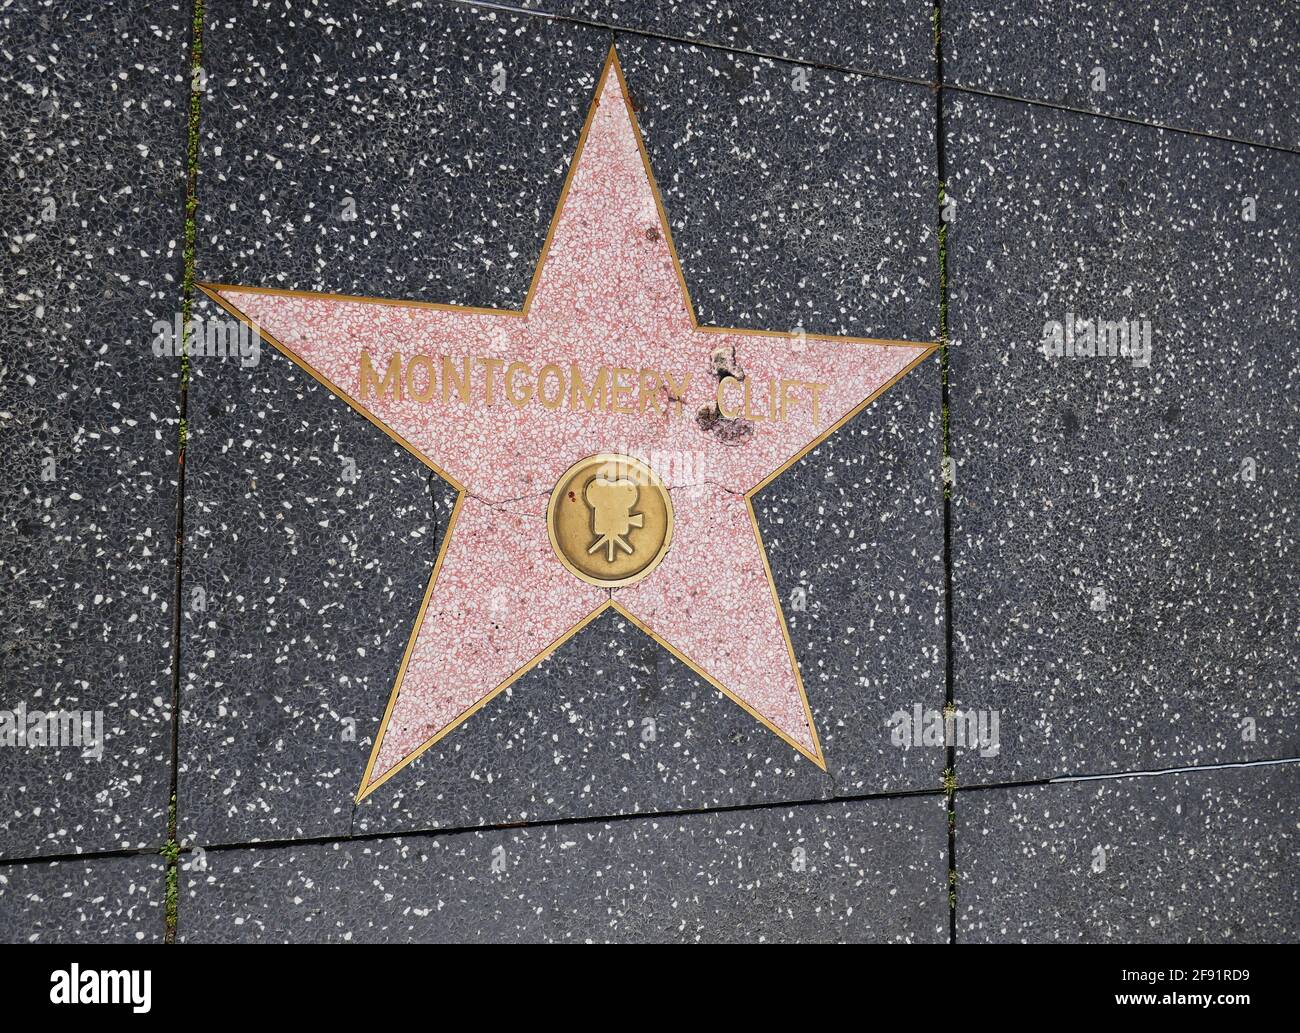 Hollywood, California, USA 14th April 2021 A general view of atmosphere of actor Montgomery Clift's Star on Hollywood Walk of Fame on April 14, 2021 in Hollywood, California, USA. Photo by Barry King/Alamy Stock Photo Stock Photo